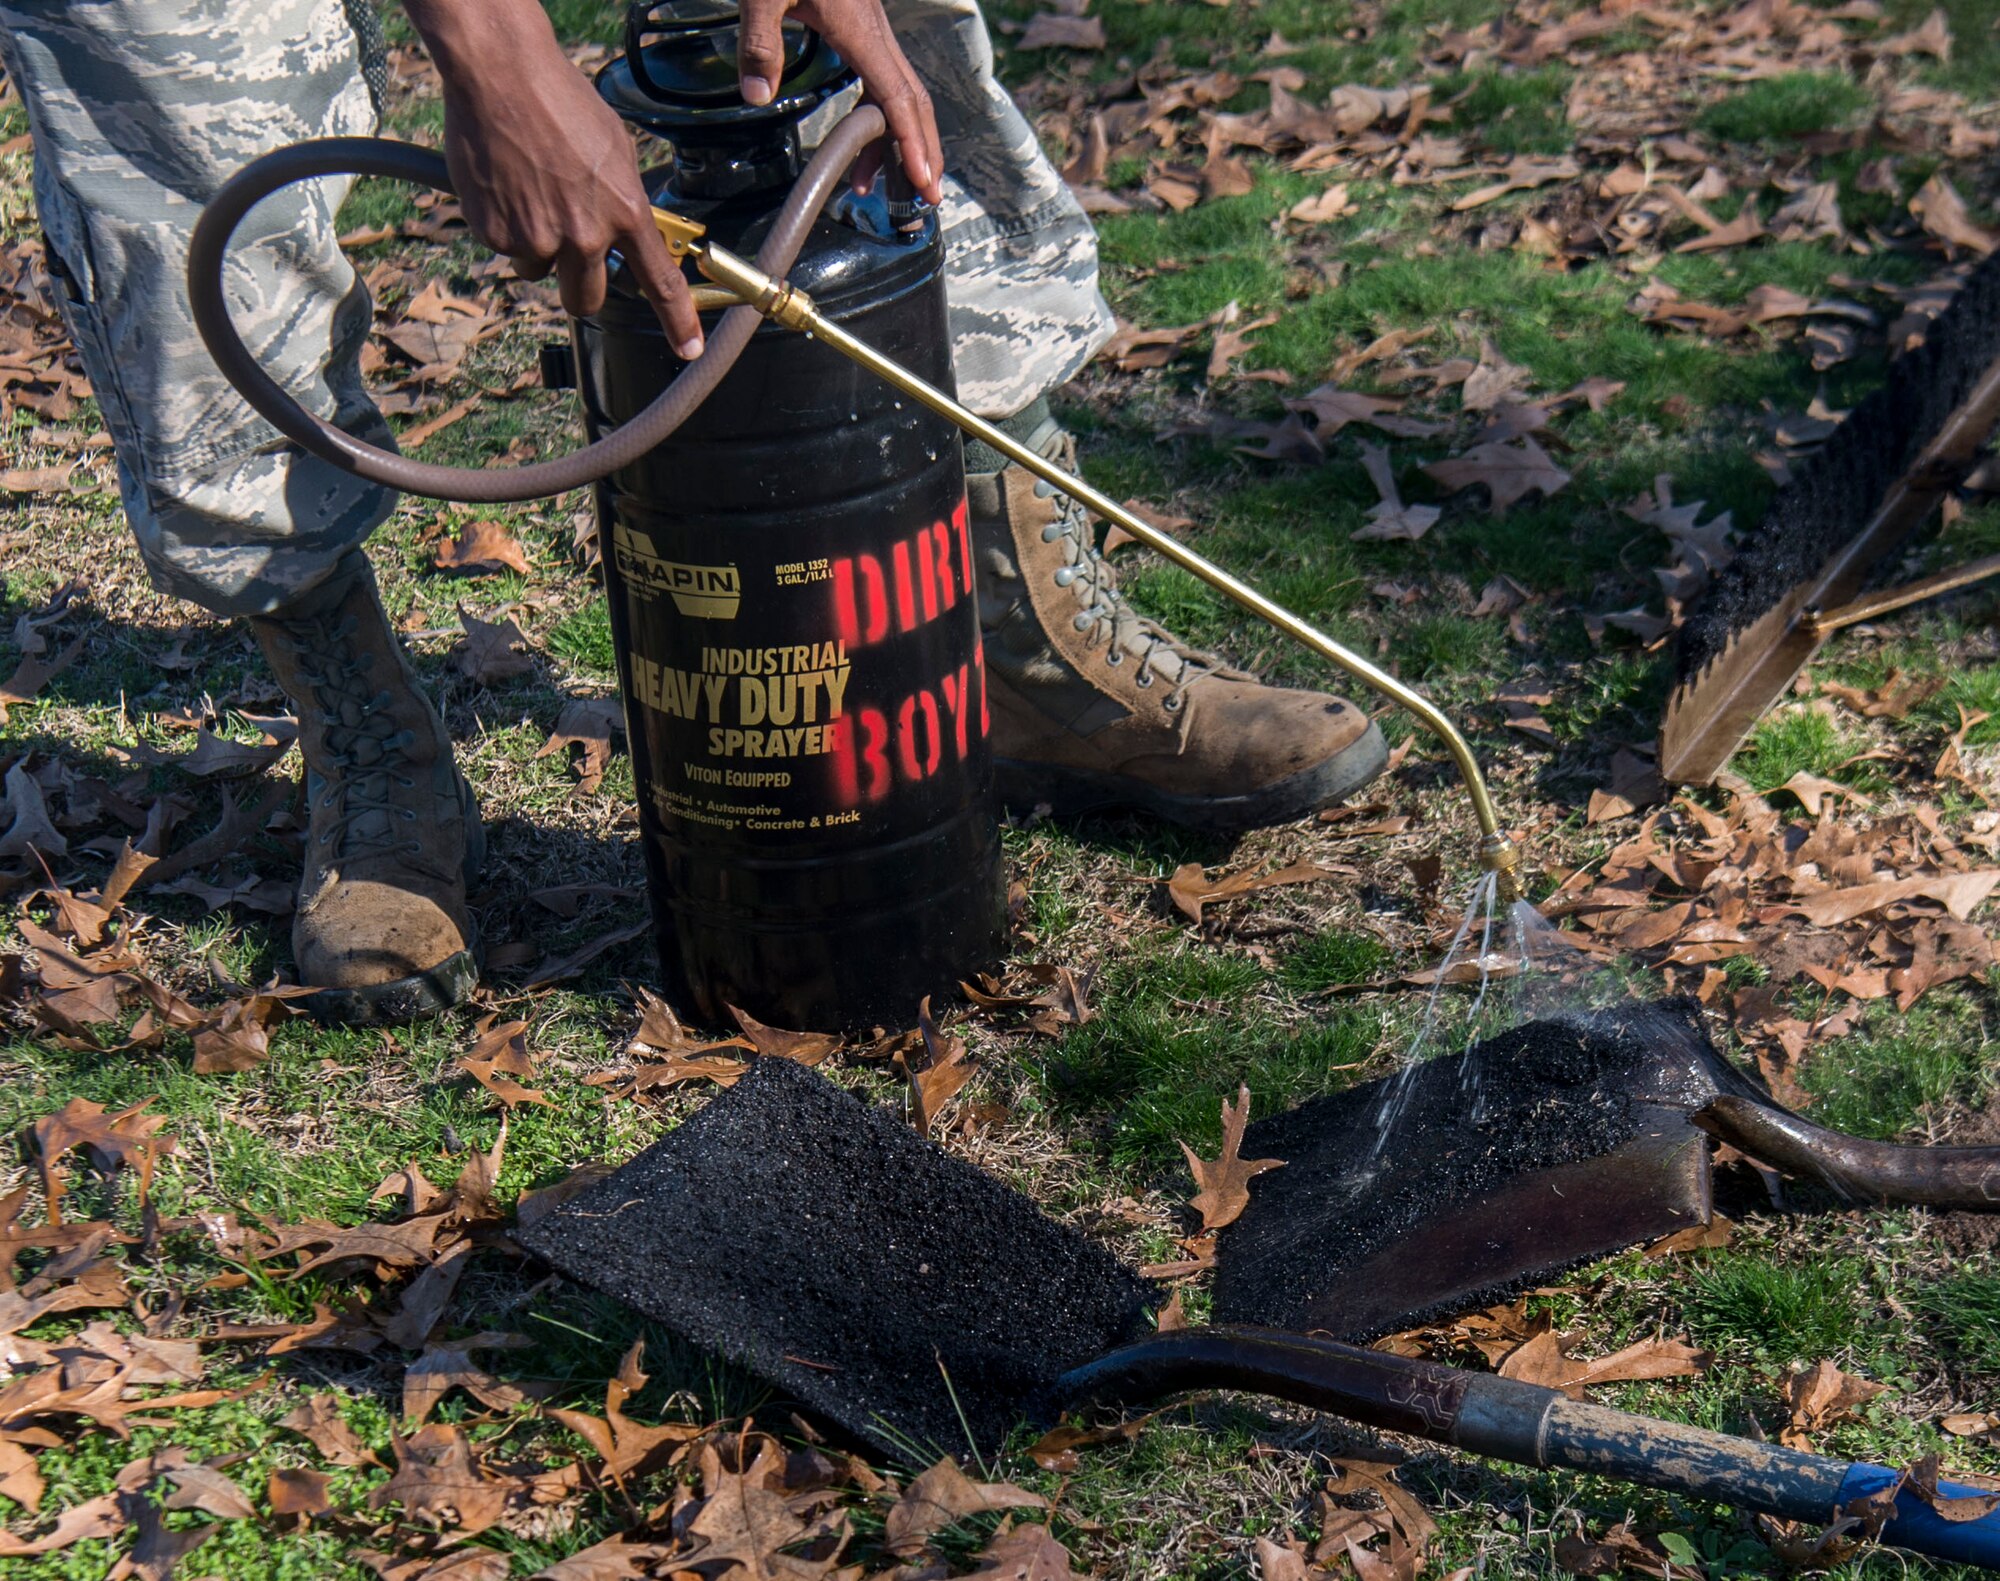 The 20th Civil Engineer Squadron Airmen, also known as the Dirt Boyz, spray shovels, equipment and their shoes with asphalt remover at Shaw Air Force Base, S.C., Jan. 8, 2019.